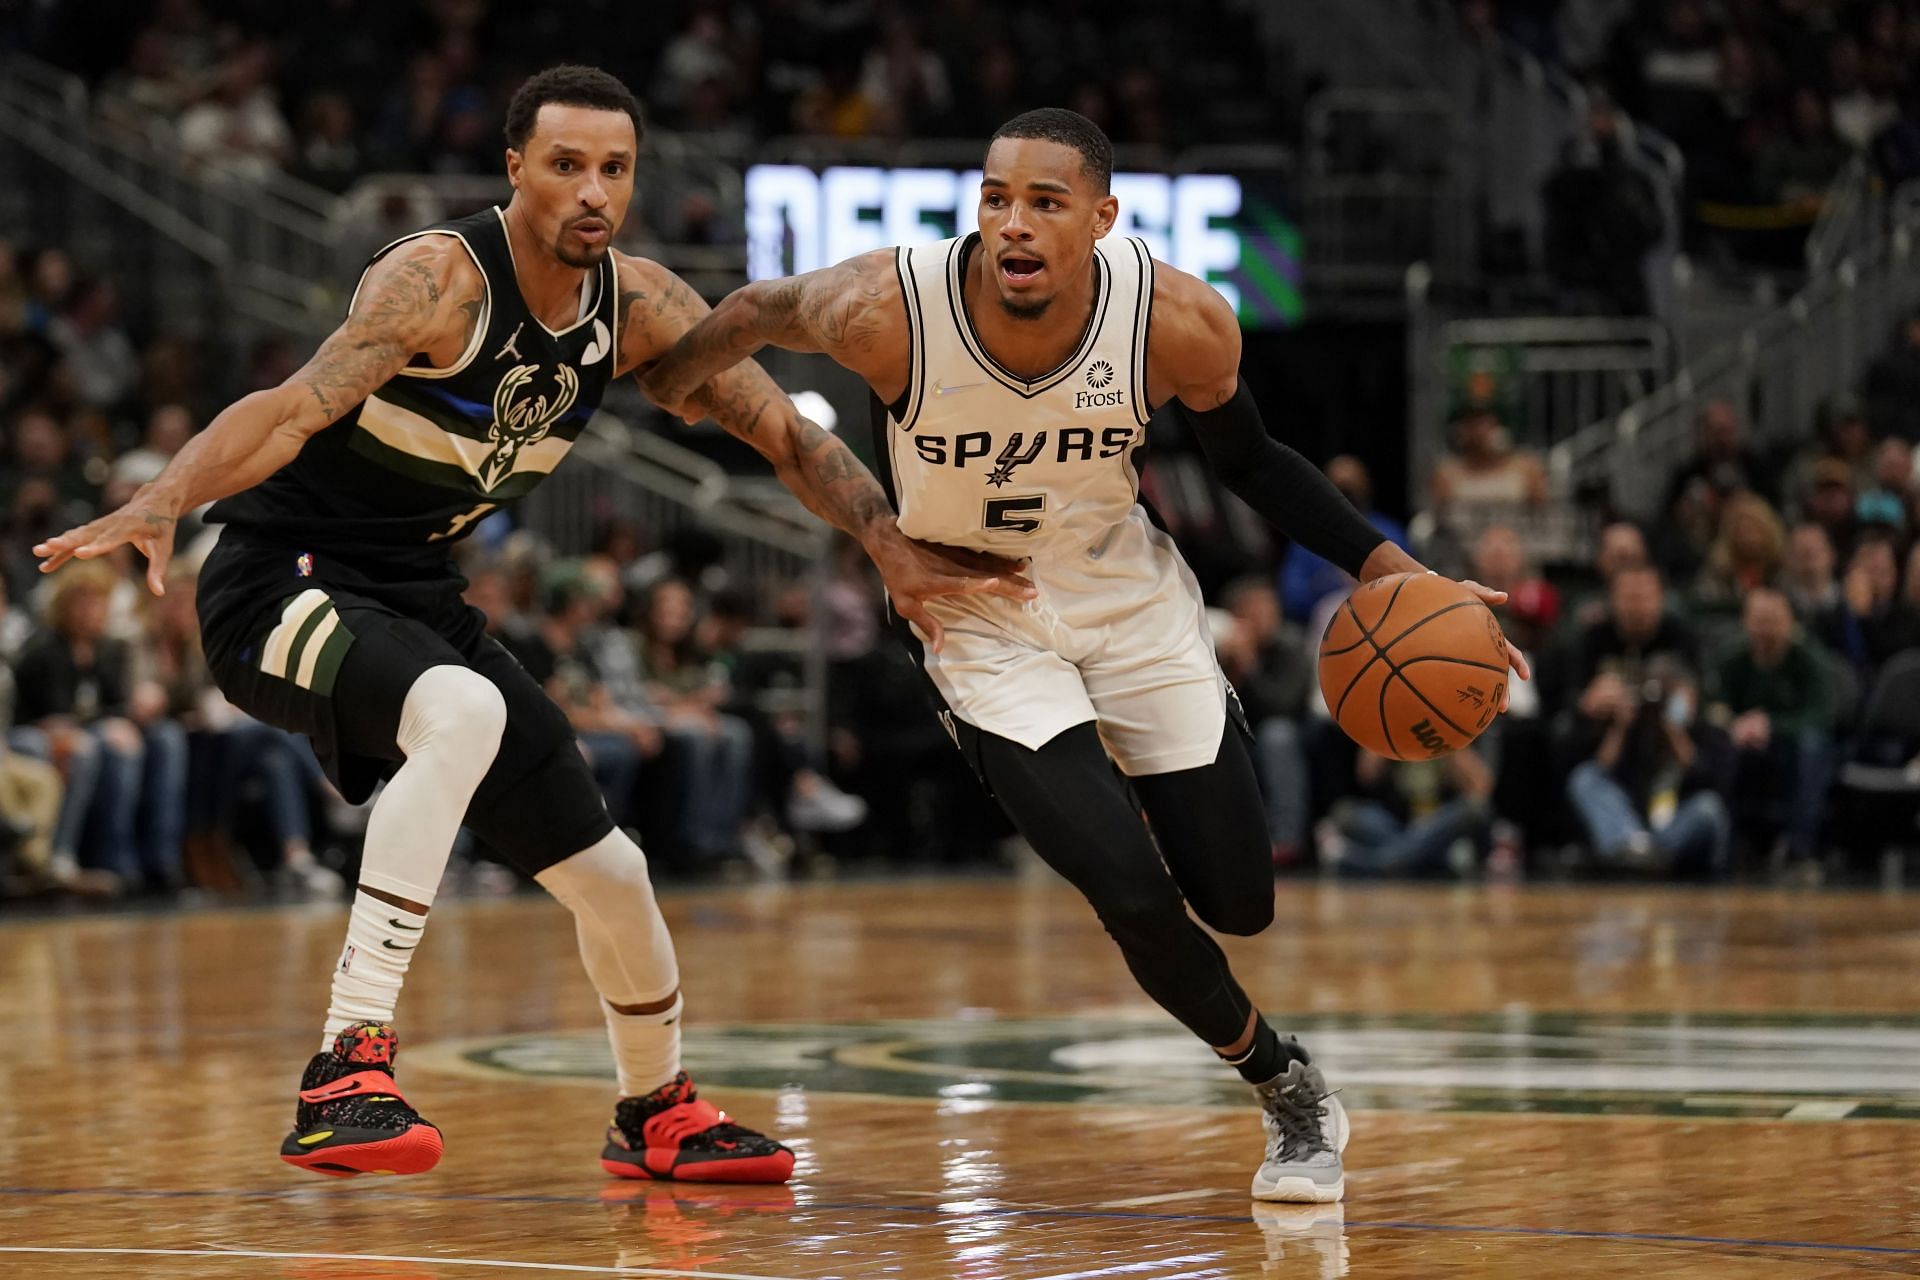 Dejounte Murray #5 of the San Antonio Spurs dribbles the ball against George Hill #3 of the Milwaukee Bucks in the second half at Fiserv Forum on October 30, 2021 in Milwaukee, Wisconsin.